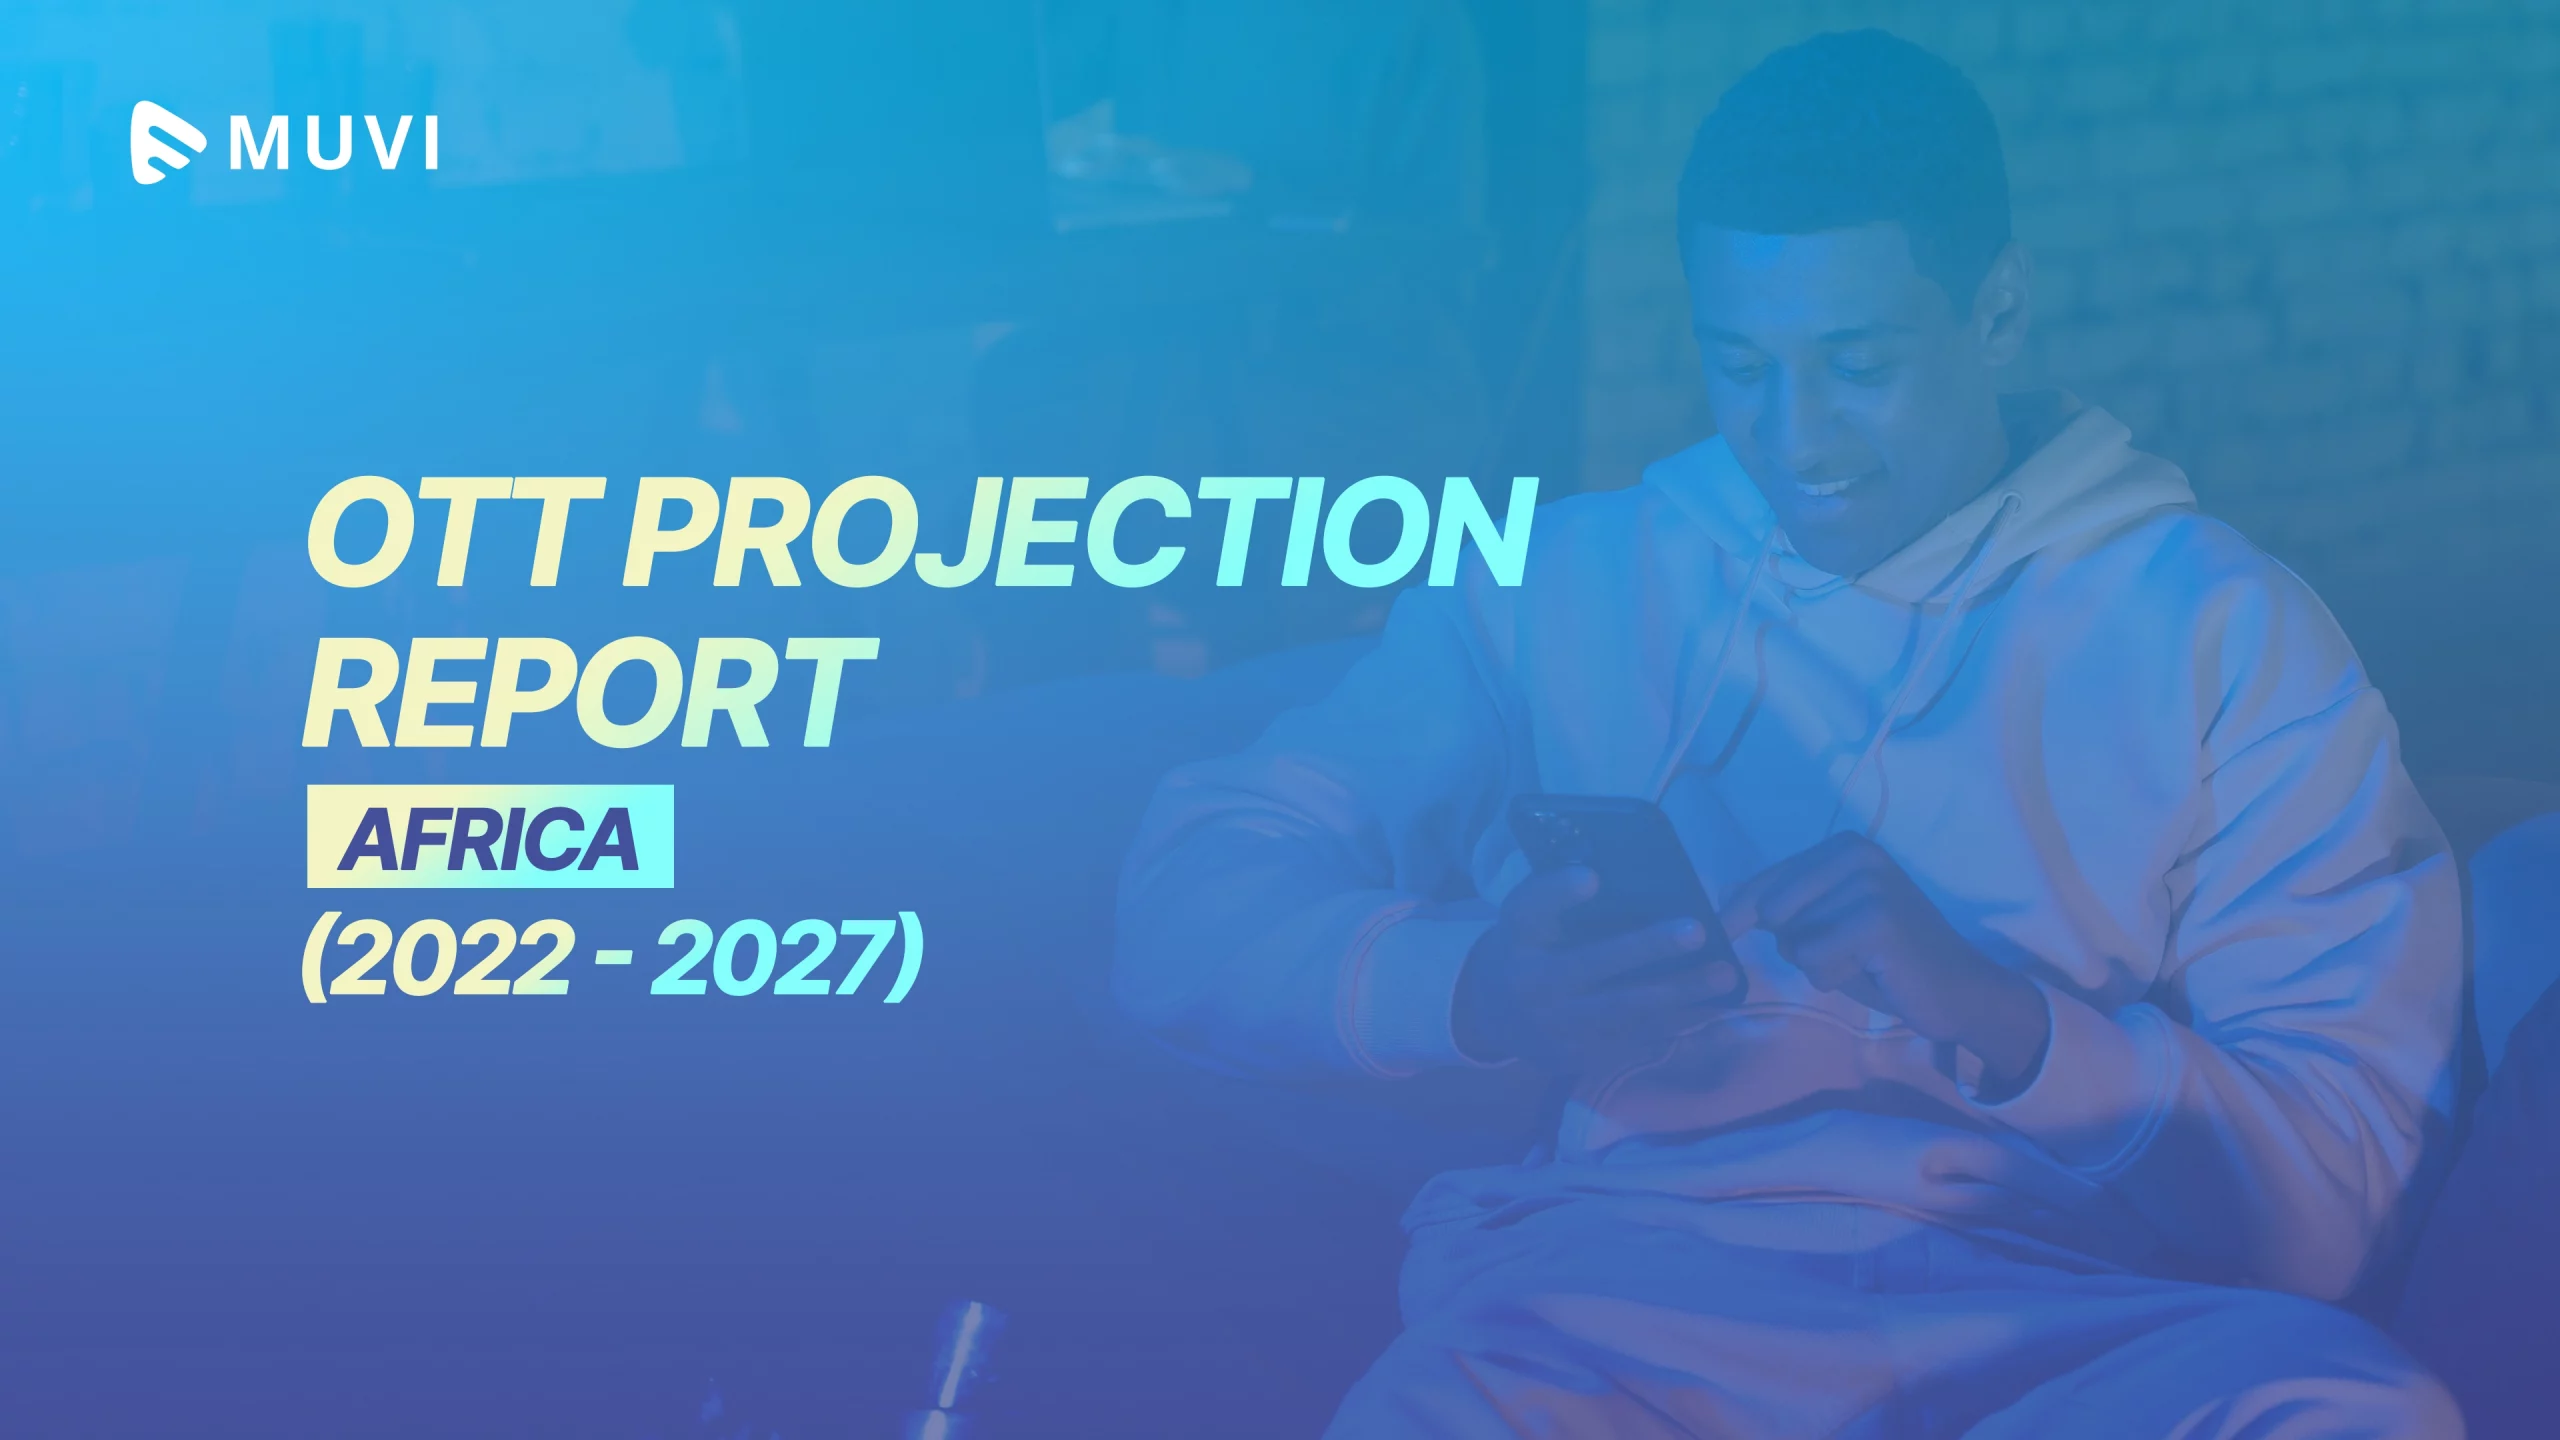 OTT Projection Report for Africa (2022-2027)